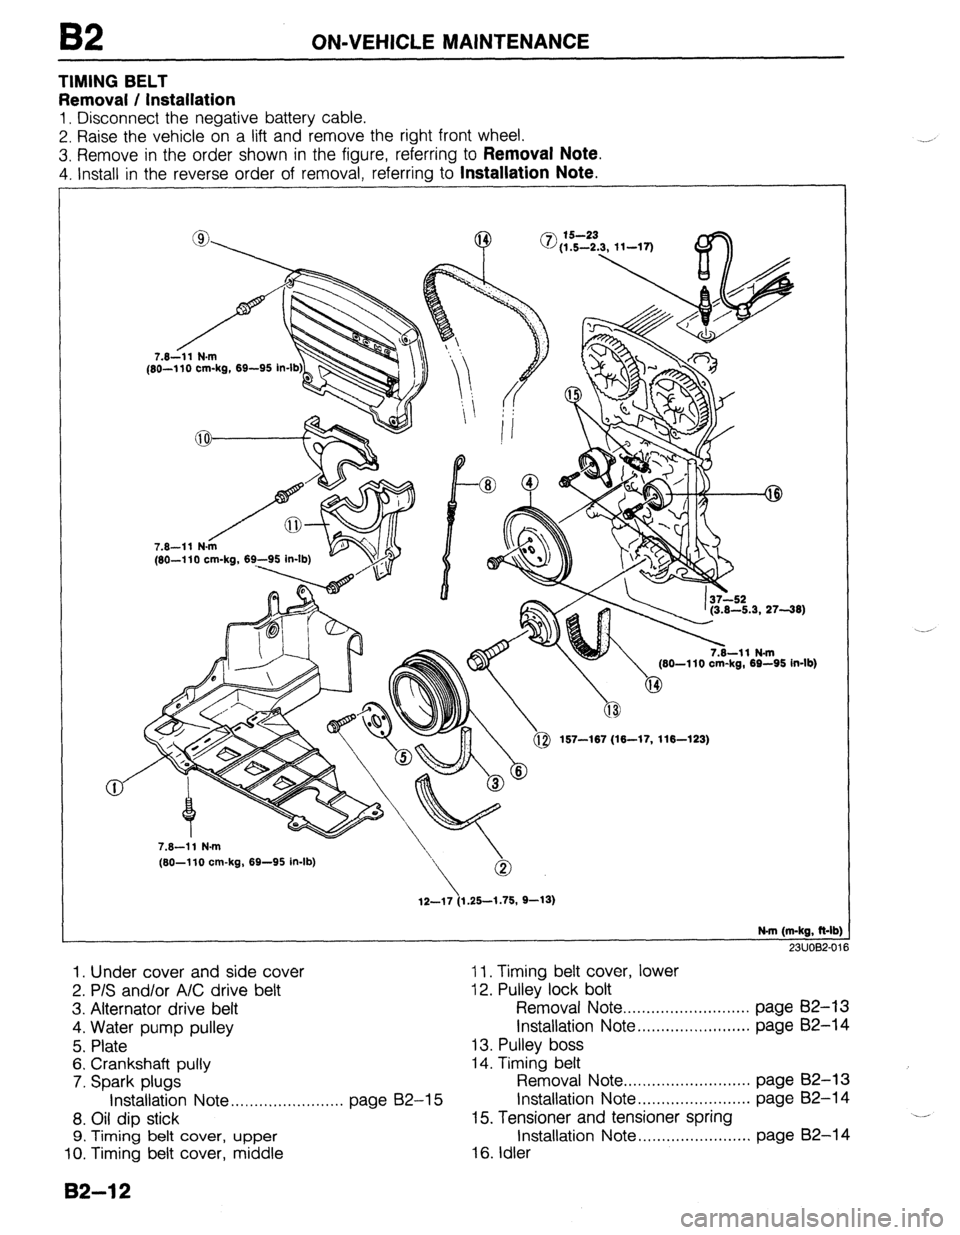 MAZDA 323 1989  Factory Repair Manual B2 ON-VEHICLE MAINTENANCE 
TIMING BELT 
Removal / Installation 
1. Disconnect the negative battery cable. 
2. Raise the vehicle on a lift and remove the right front wheel. 
3. Remove in the order show